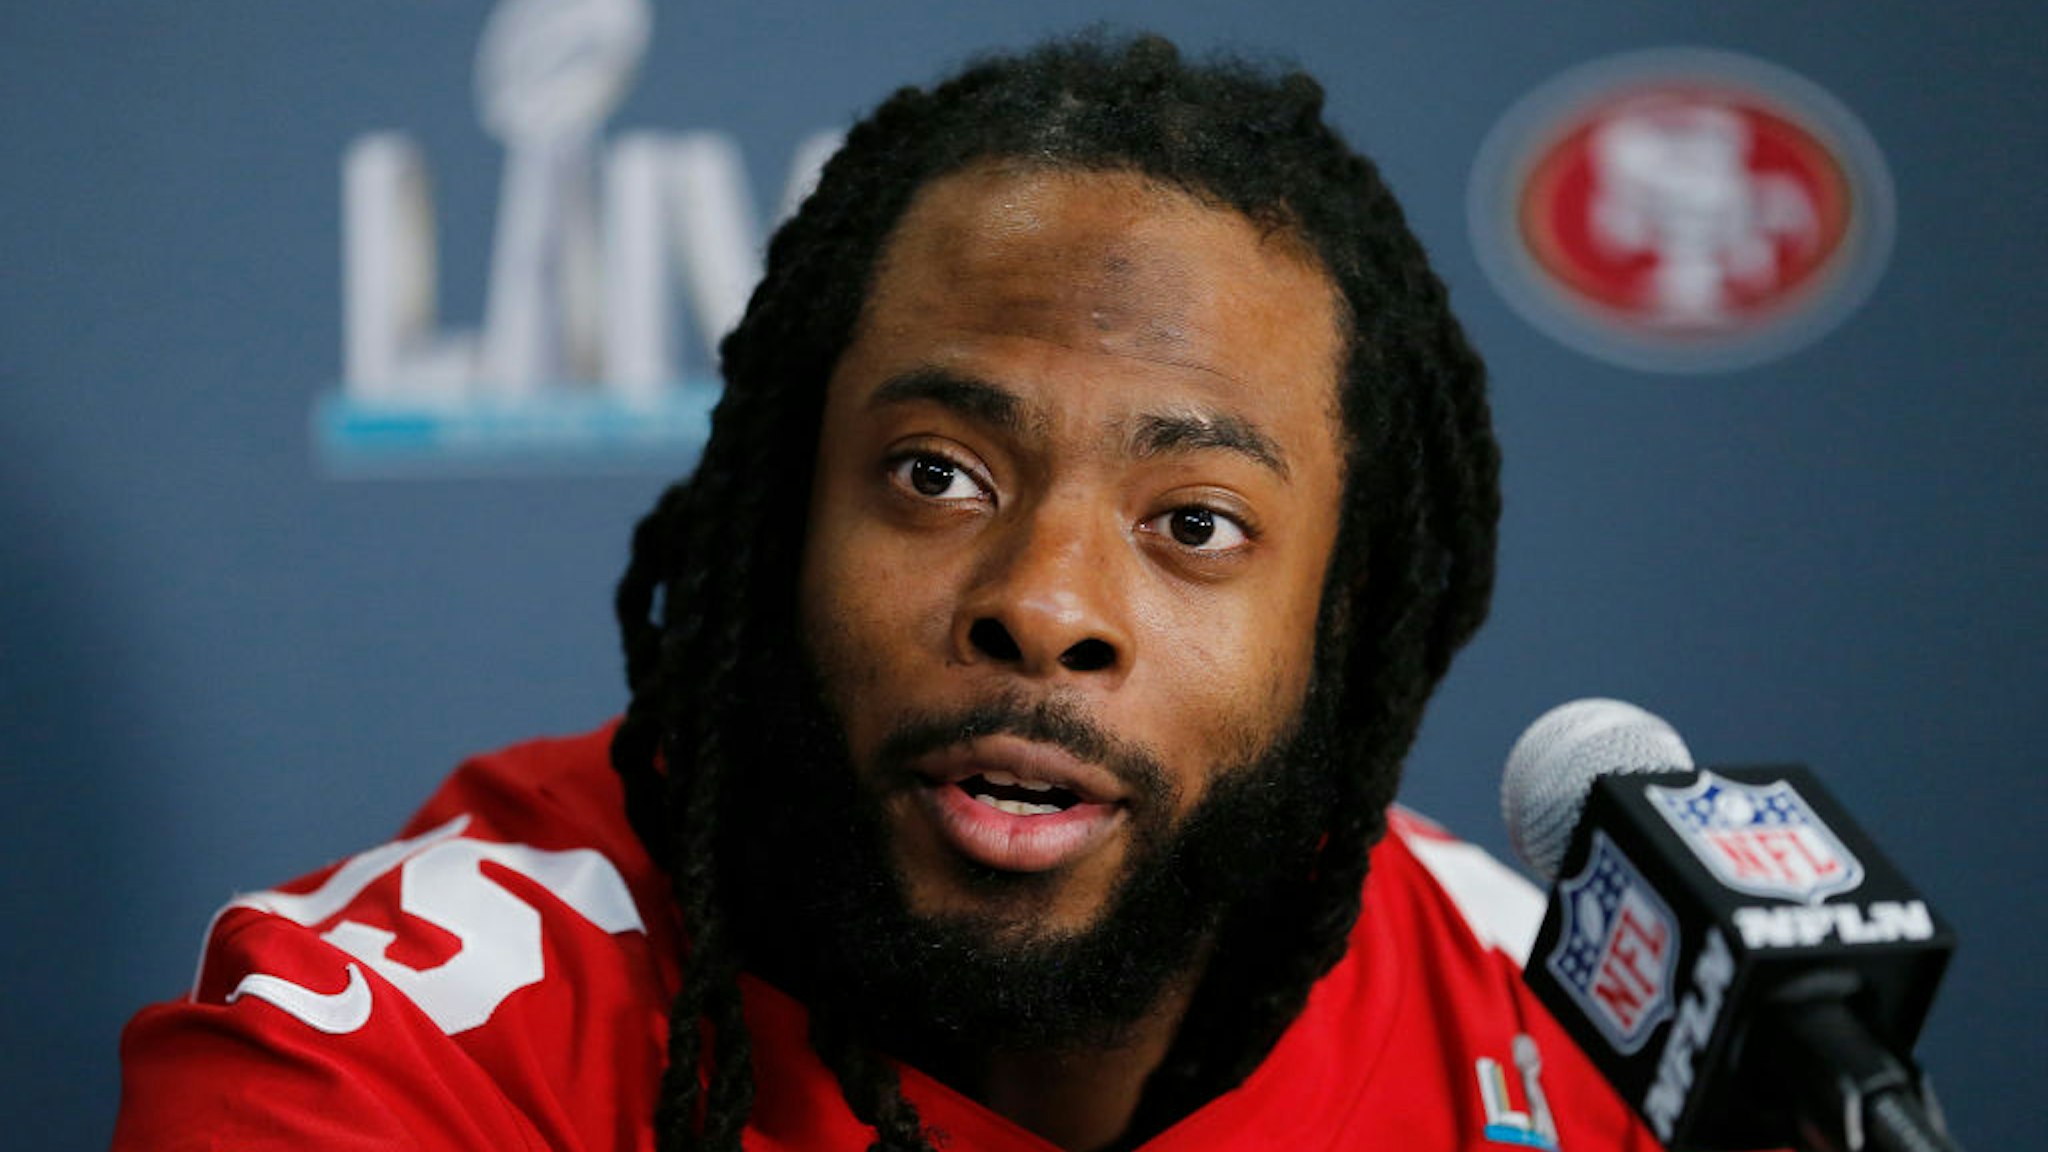 MIAMI, FLORIDA - JANUARY 30: Richard Sherman #25 of the San Francisco 49ers speaks to the media during the San Francisco 49ers media availability prior to Super Bowl LIV at the James L. Knight Center on January 30, 2020 in Miami, Florida. (Photo by Michael Reaves/Getty Images)